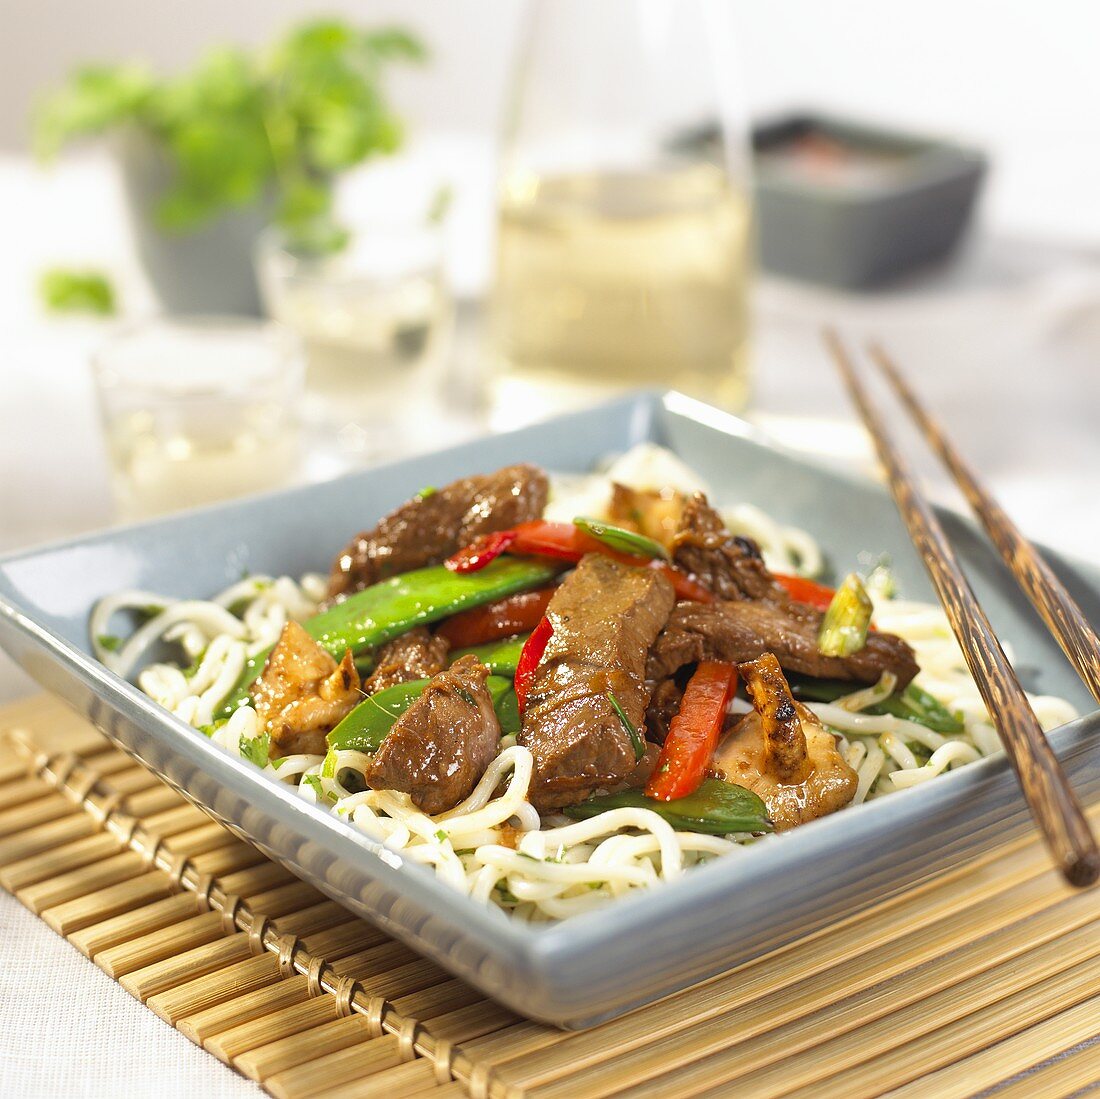 Fried beef and vegetables on noodles